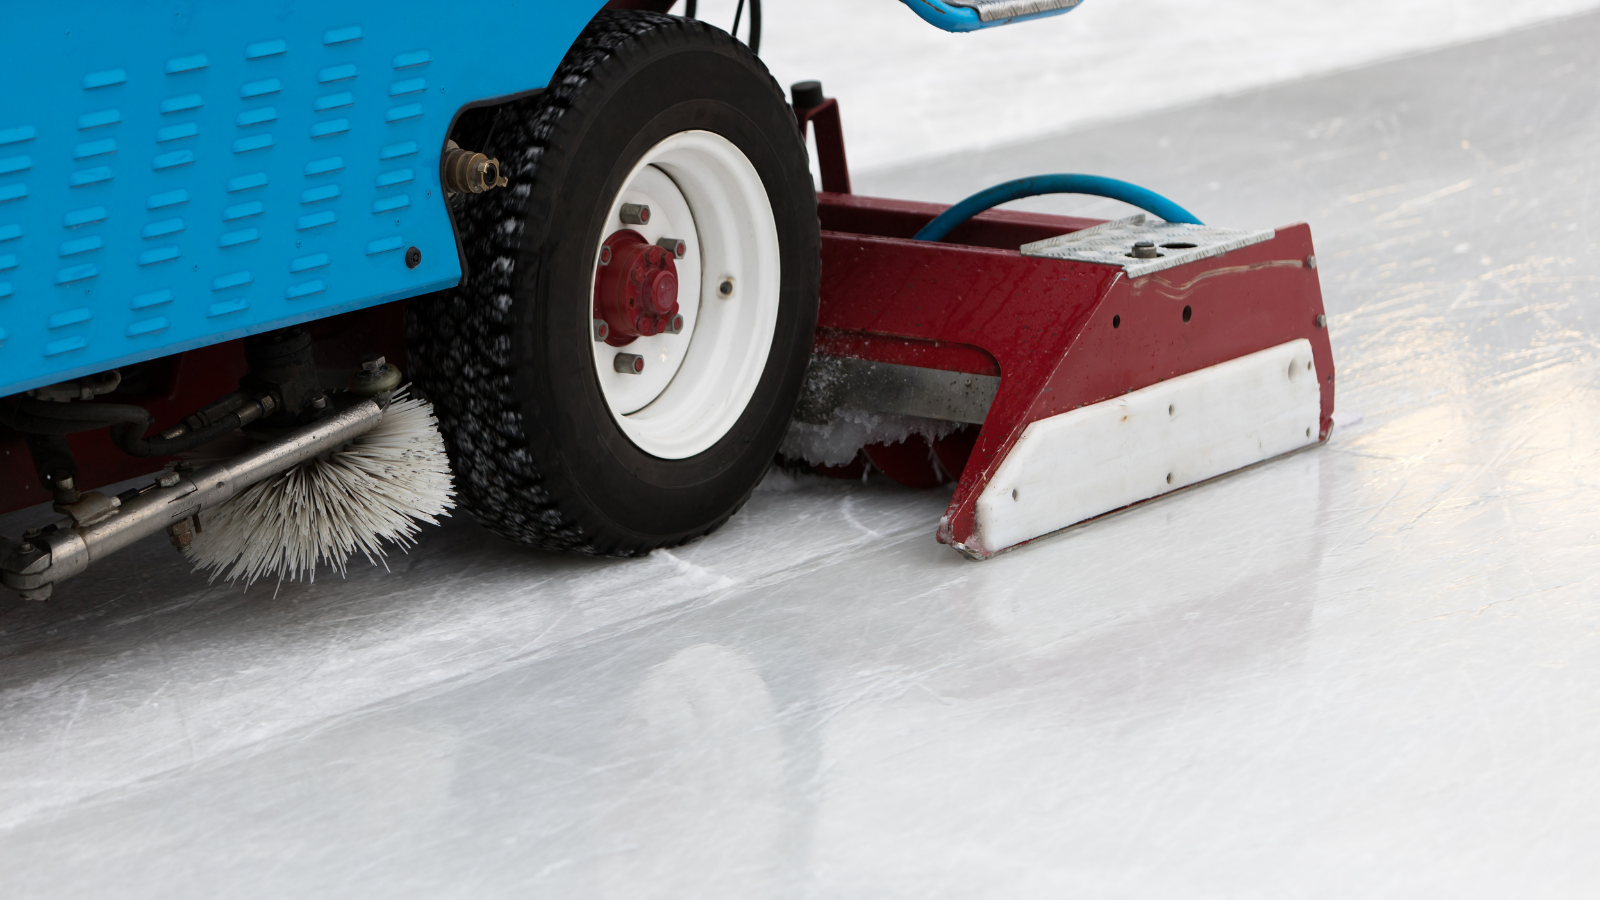 A close up of a Zamboni crossing an indoor ice rink 